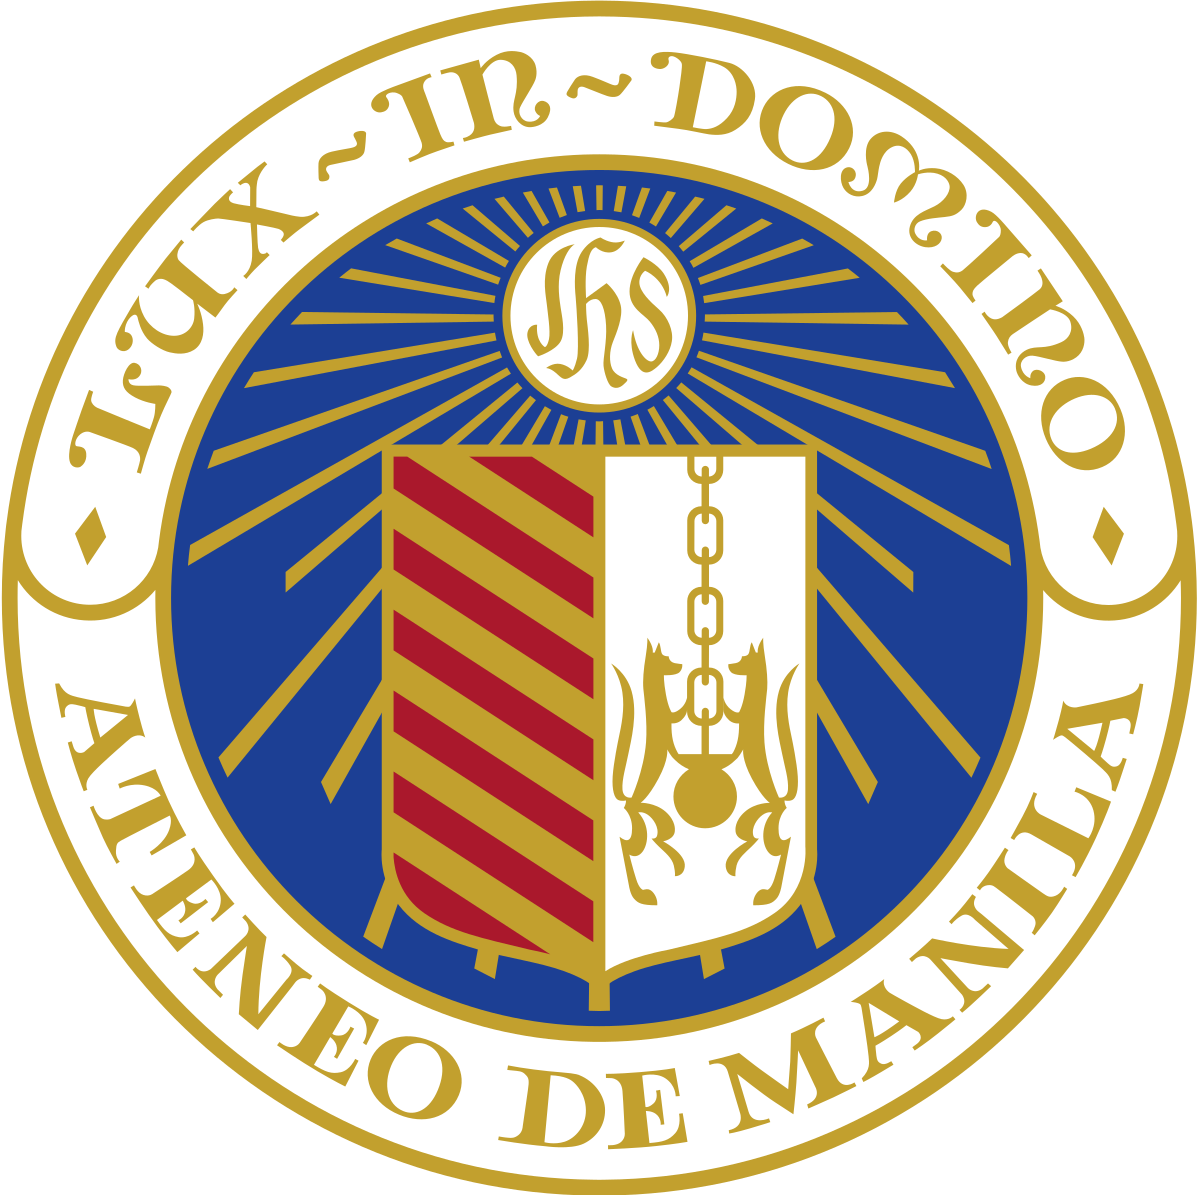 A gold outline of a circle with ATENEO DE MANILA and a blue circle and crest inside.